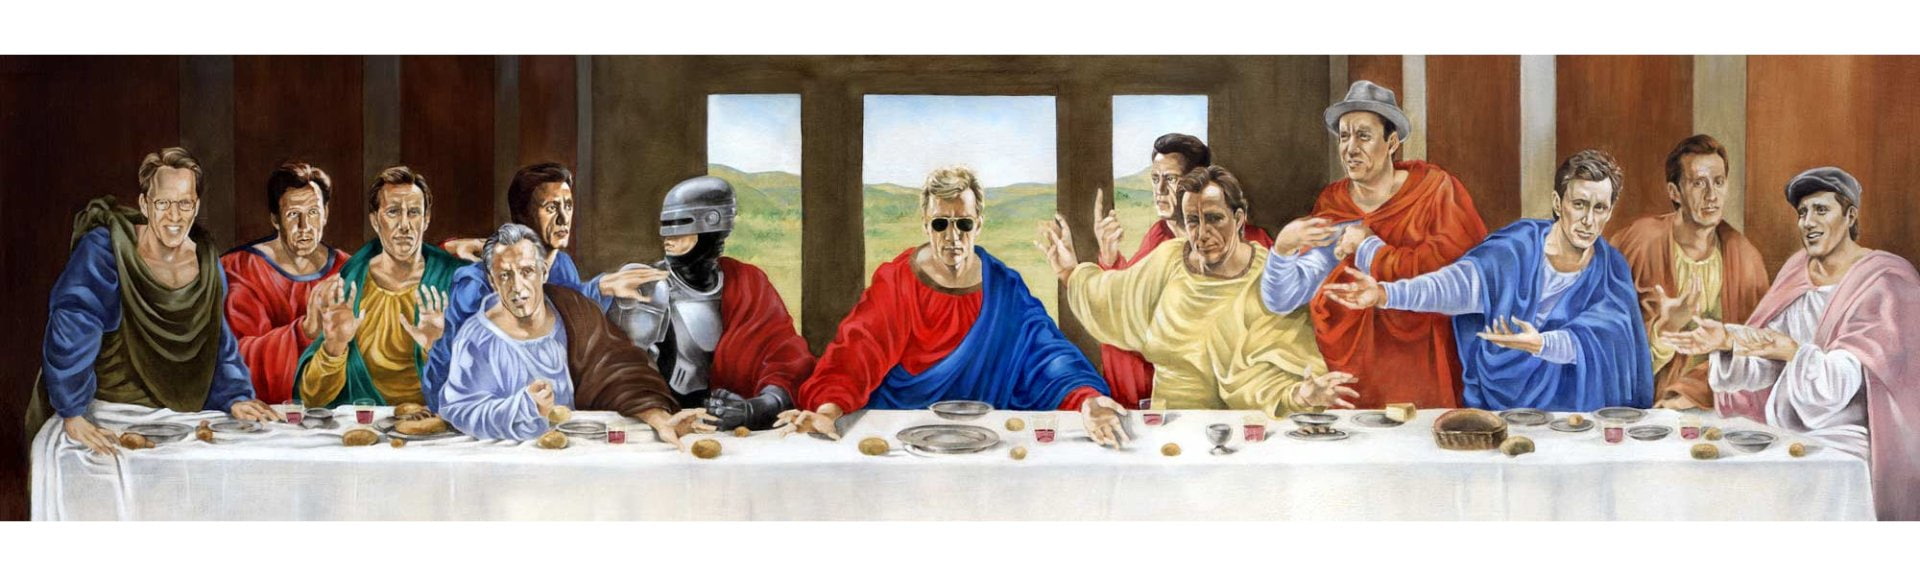 The Last Supper painting, Misc, How the hell am I suppose to categorize that